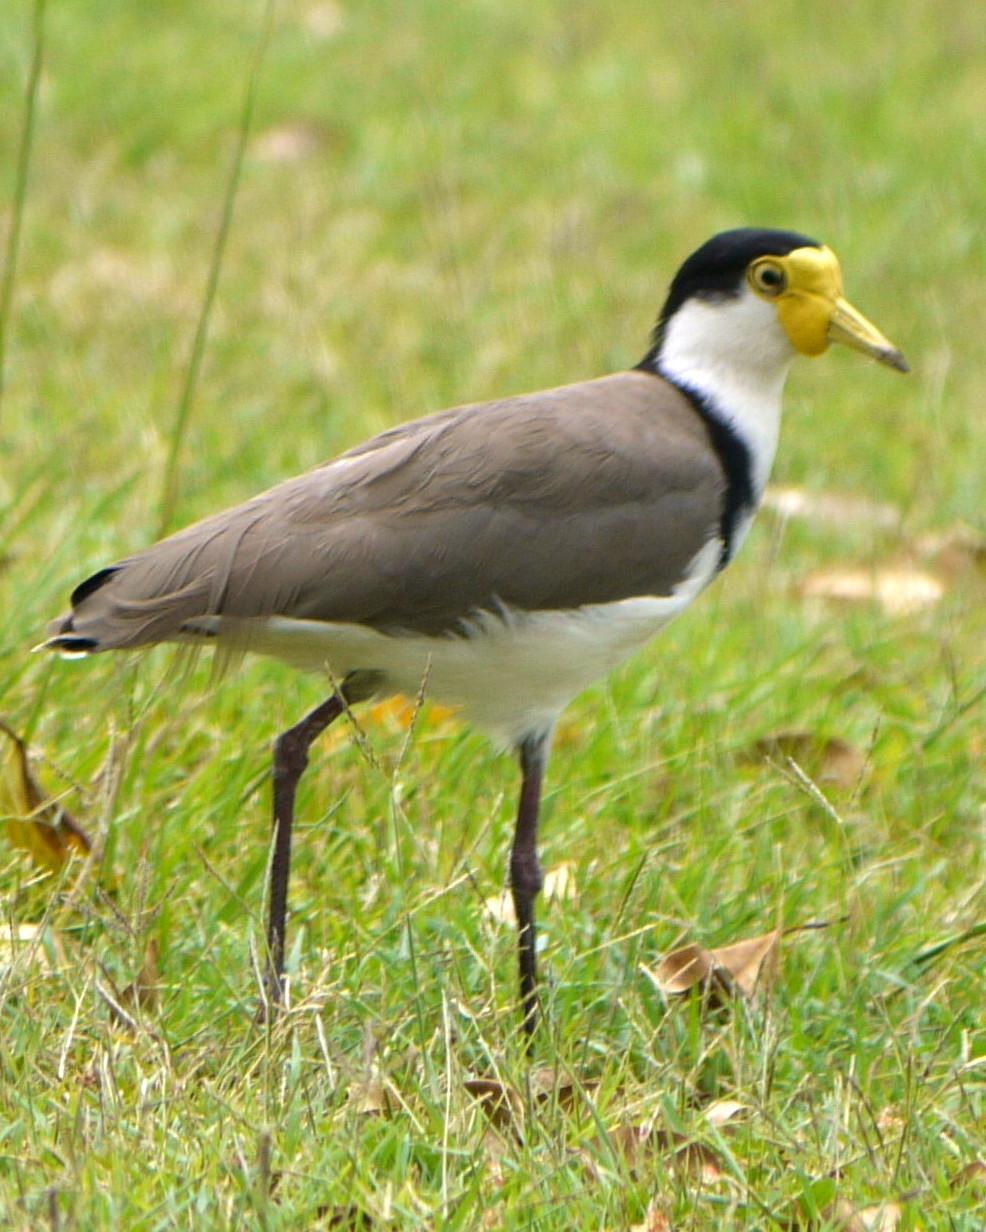 Masked Lapwing Photo by Peter Lowe